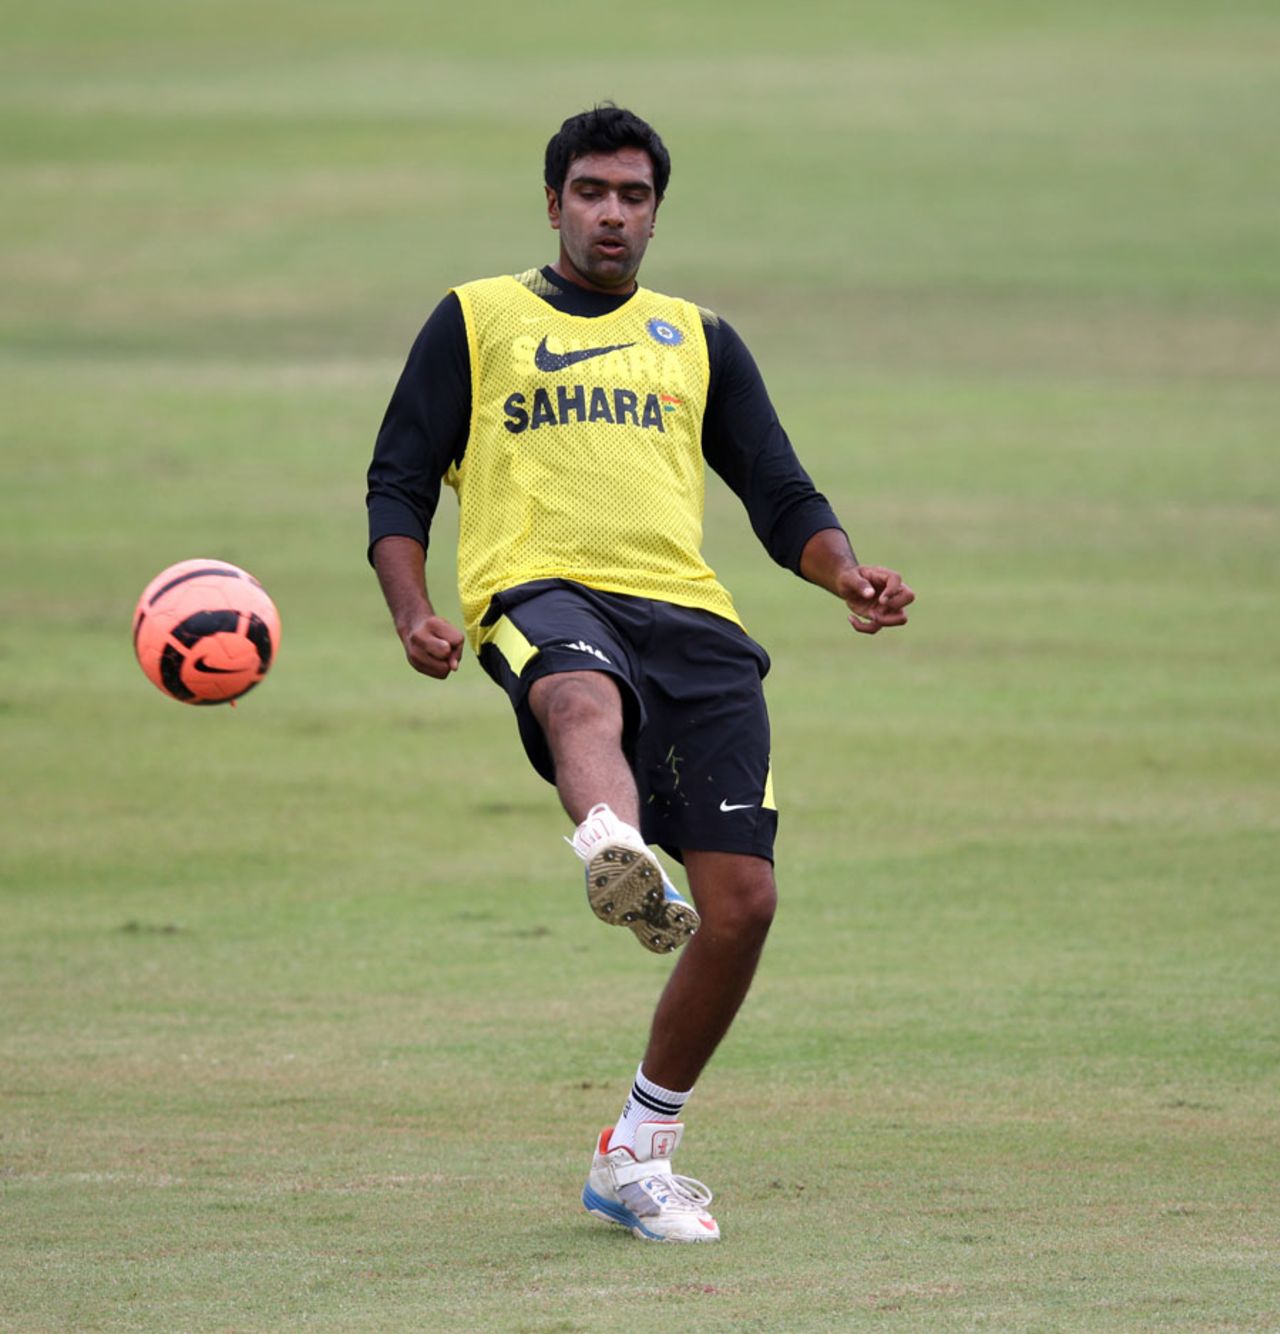 R Ashwin kicks about with a football during a practice session, Durban, December 24, 2013